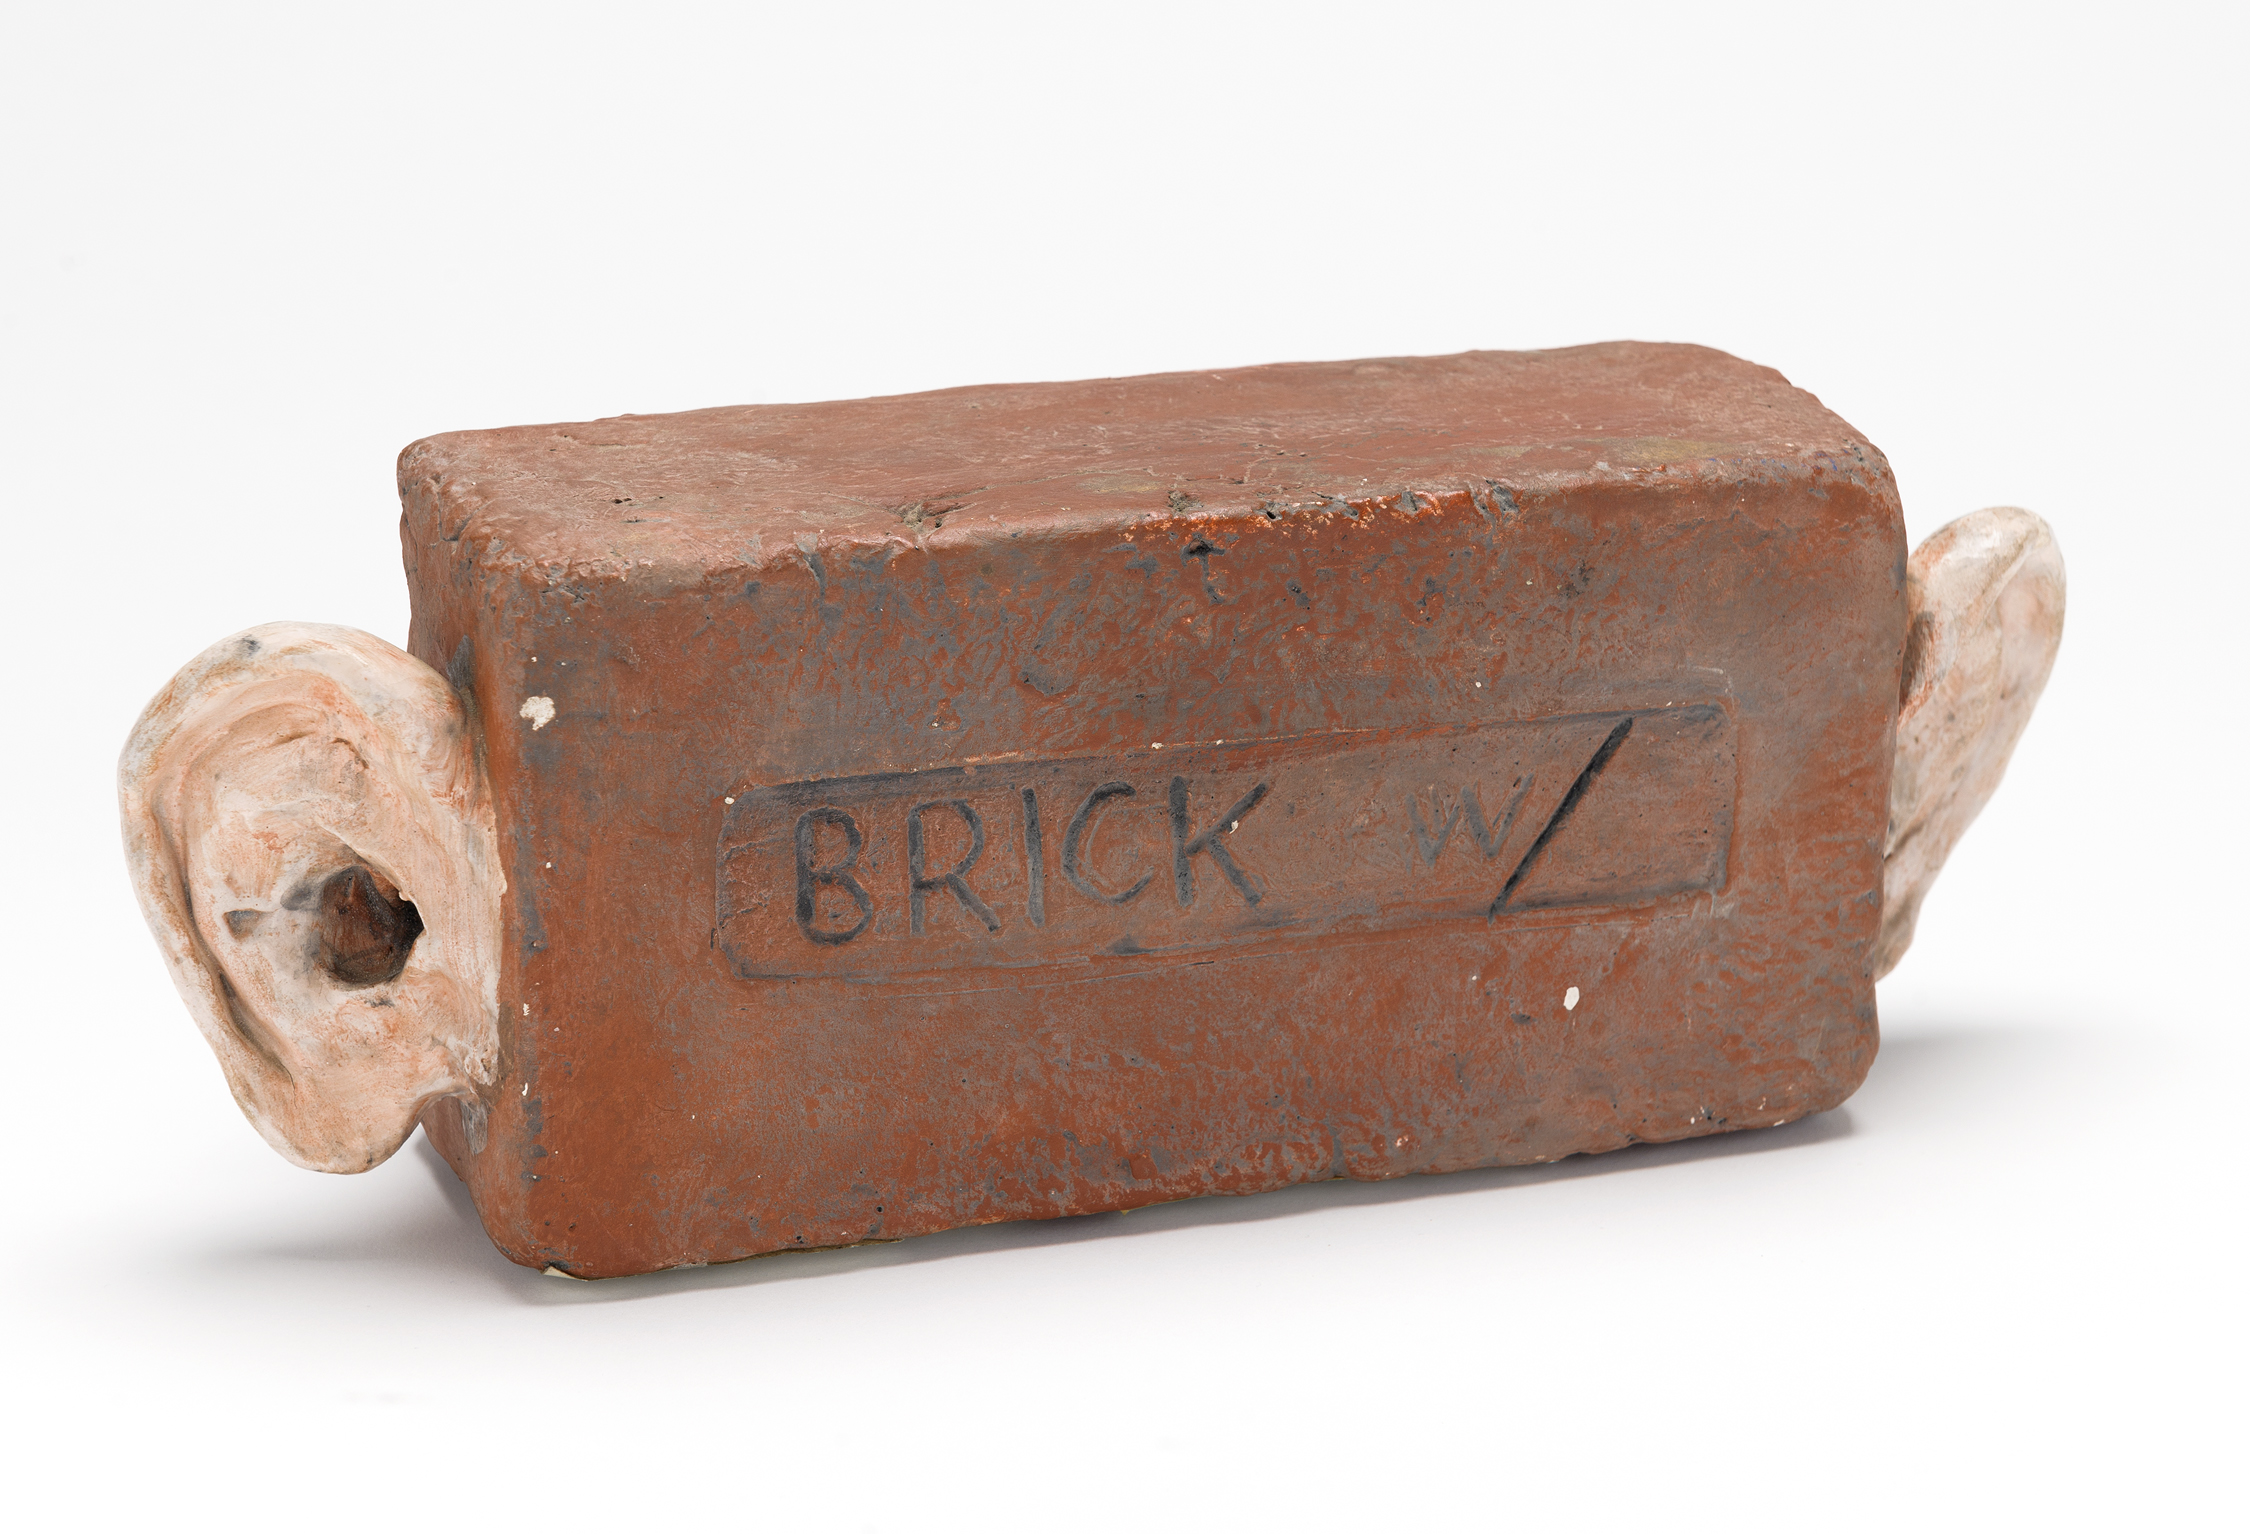 Image: Robert Arneson, Ear Brick, 1968, ceramic with partial glaze, 4¾ x 14½ x 3¼ in. Ruth S. Schaffner Collection. Photo by Tony Mastres.